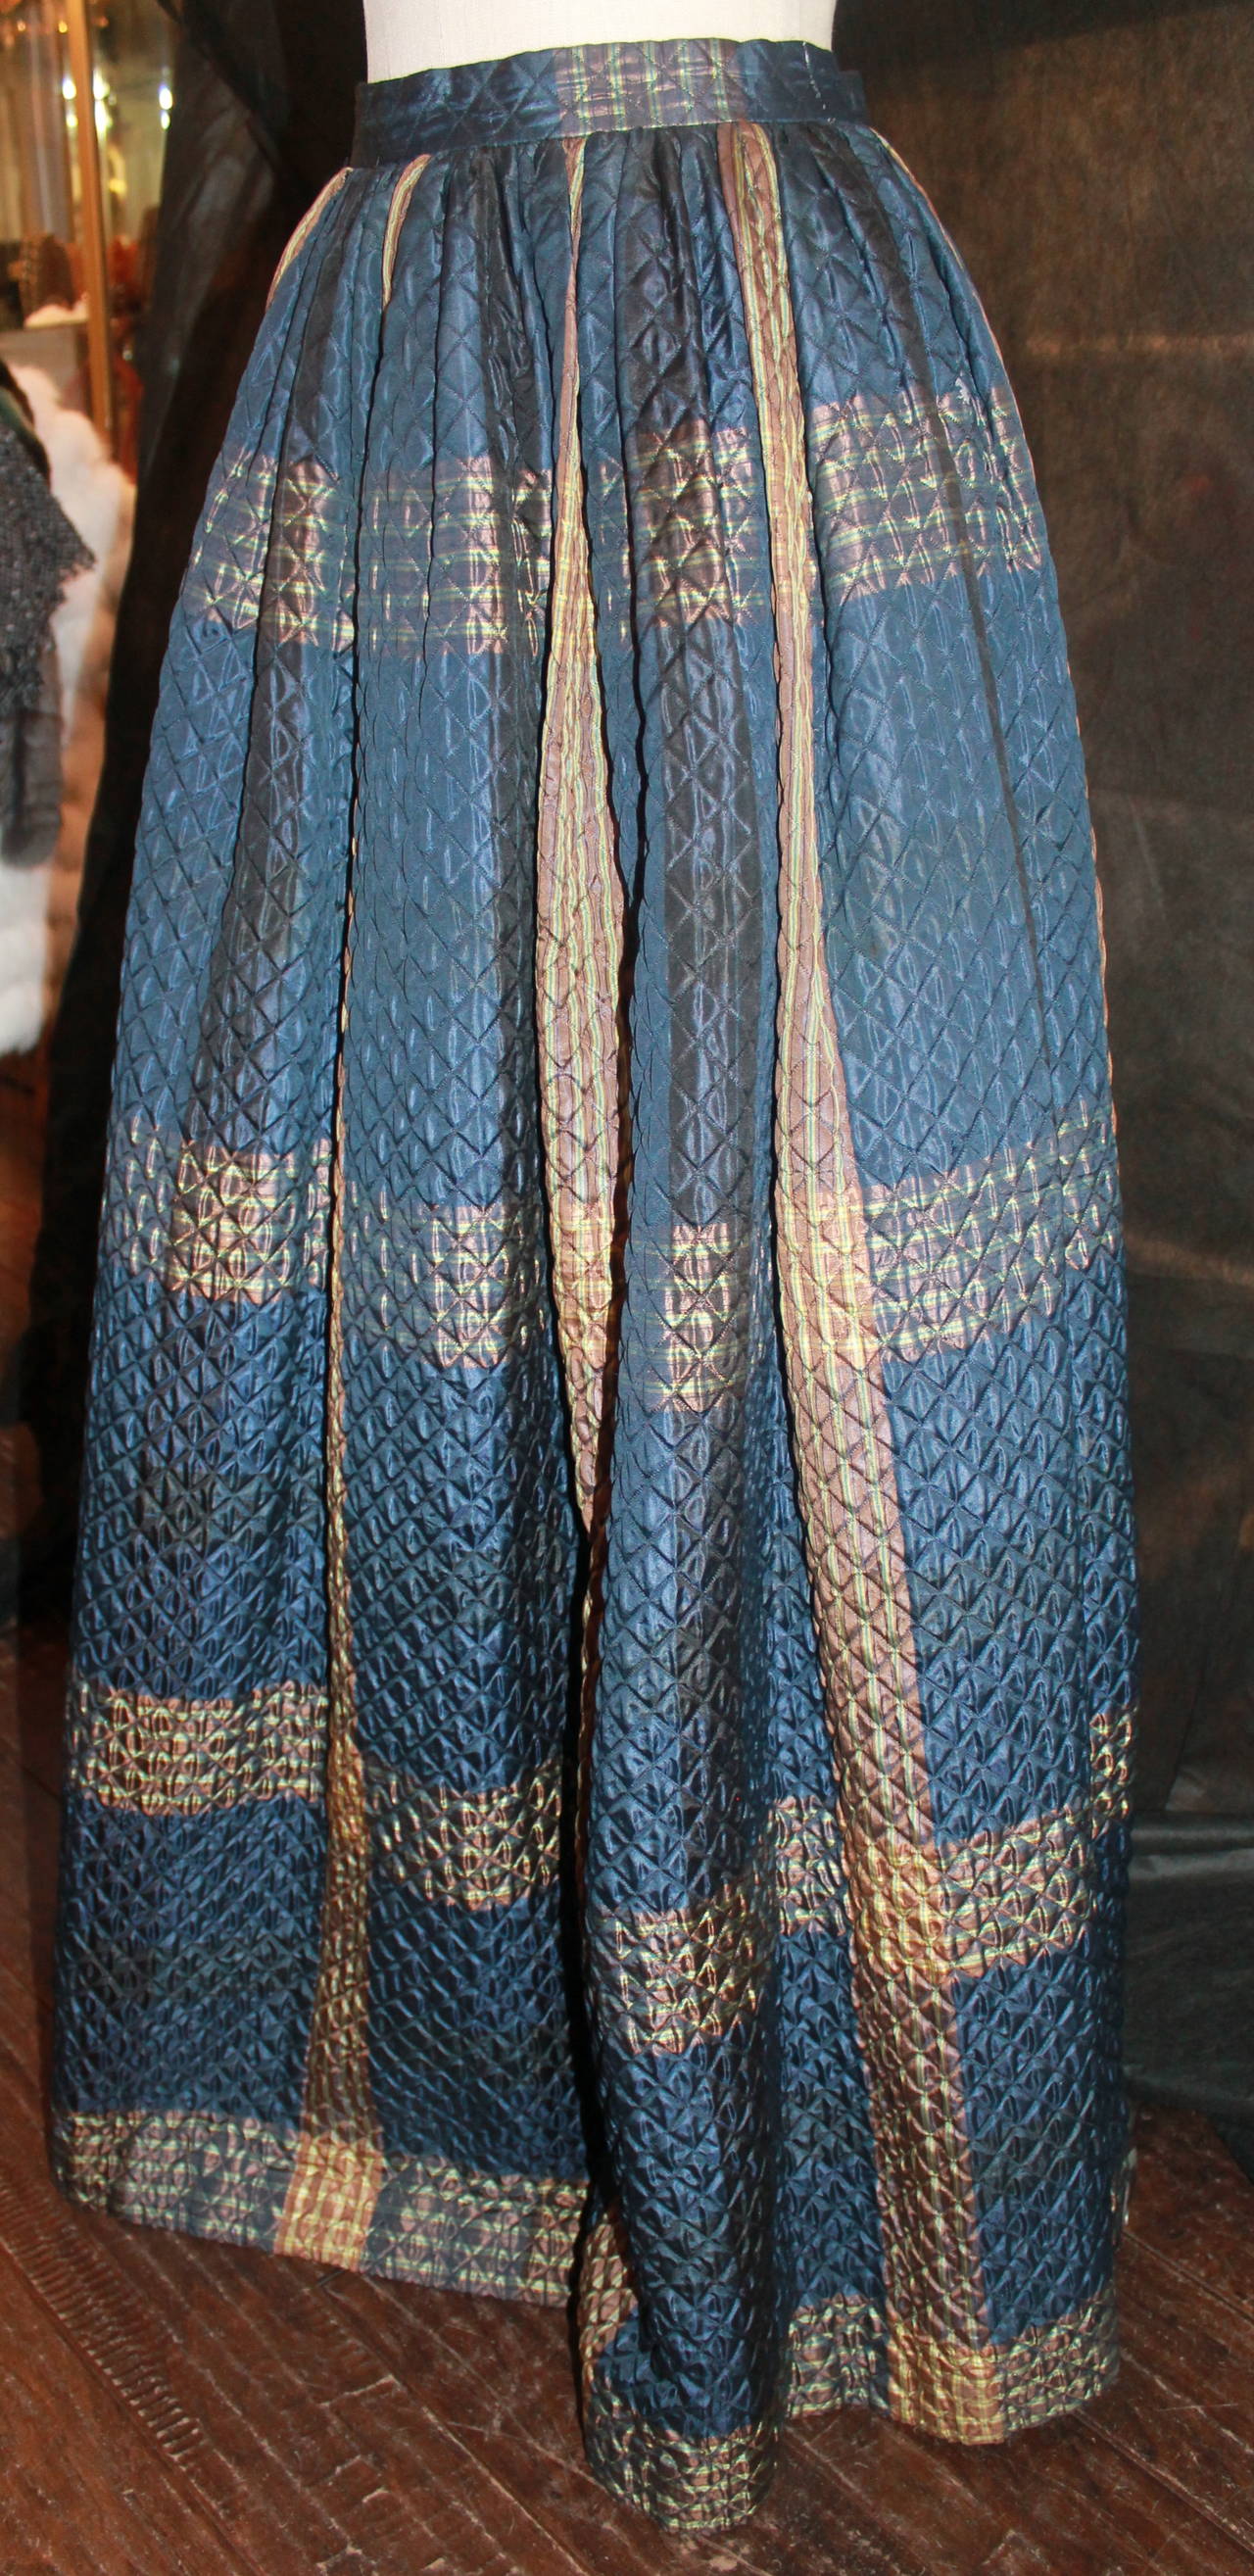 Oscar De La Renta 1990s Navy & Creme Quilted Maxi Skirt. This skirt is in very good condition with minimal signs of wear. 

Measurements:
Waist- 26.5